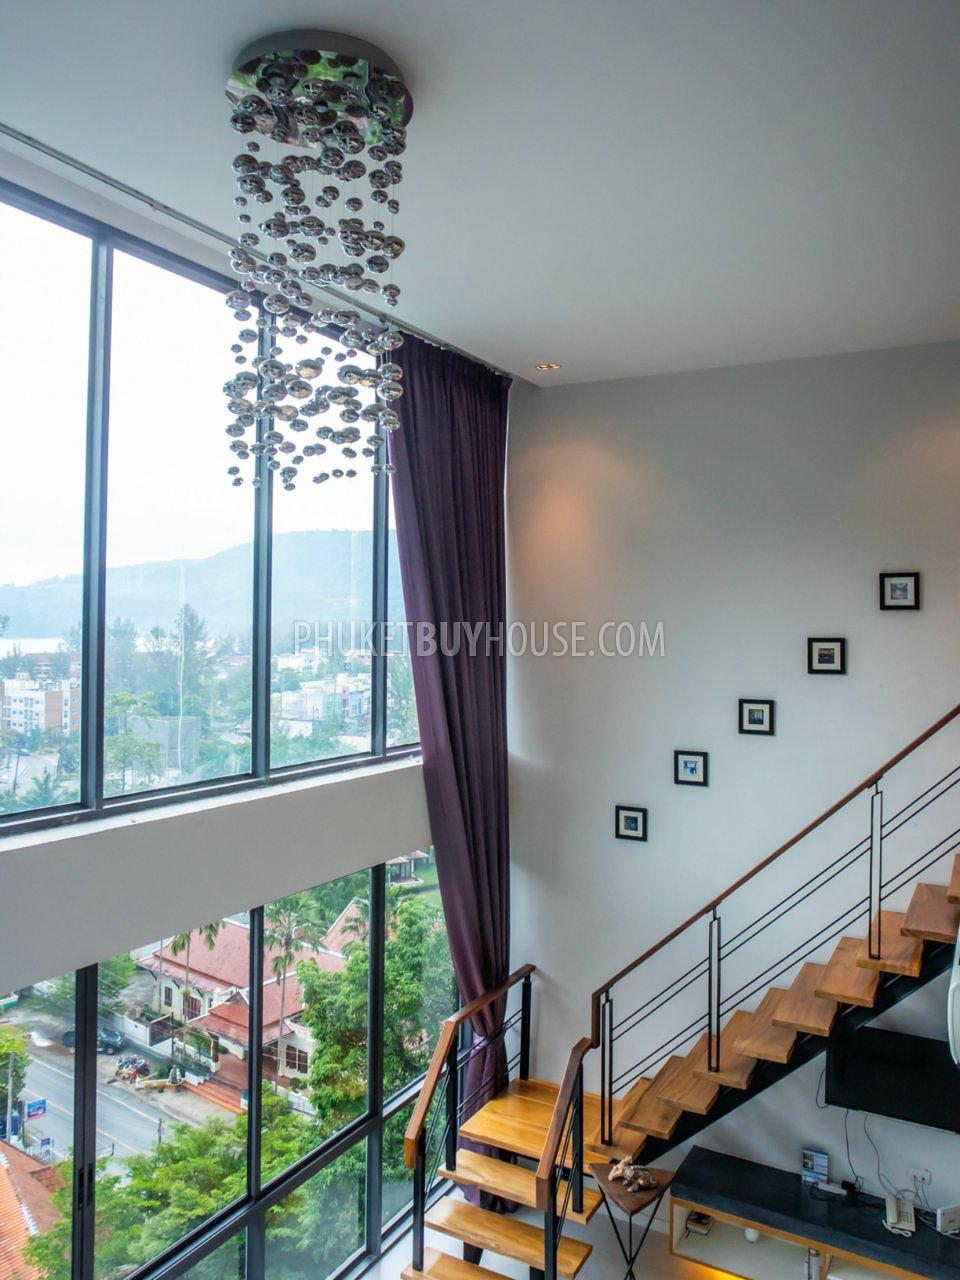 KAM6173: Penthouse with partial sea view in Kamala. Photo #21